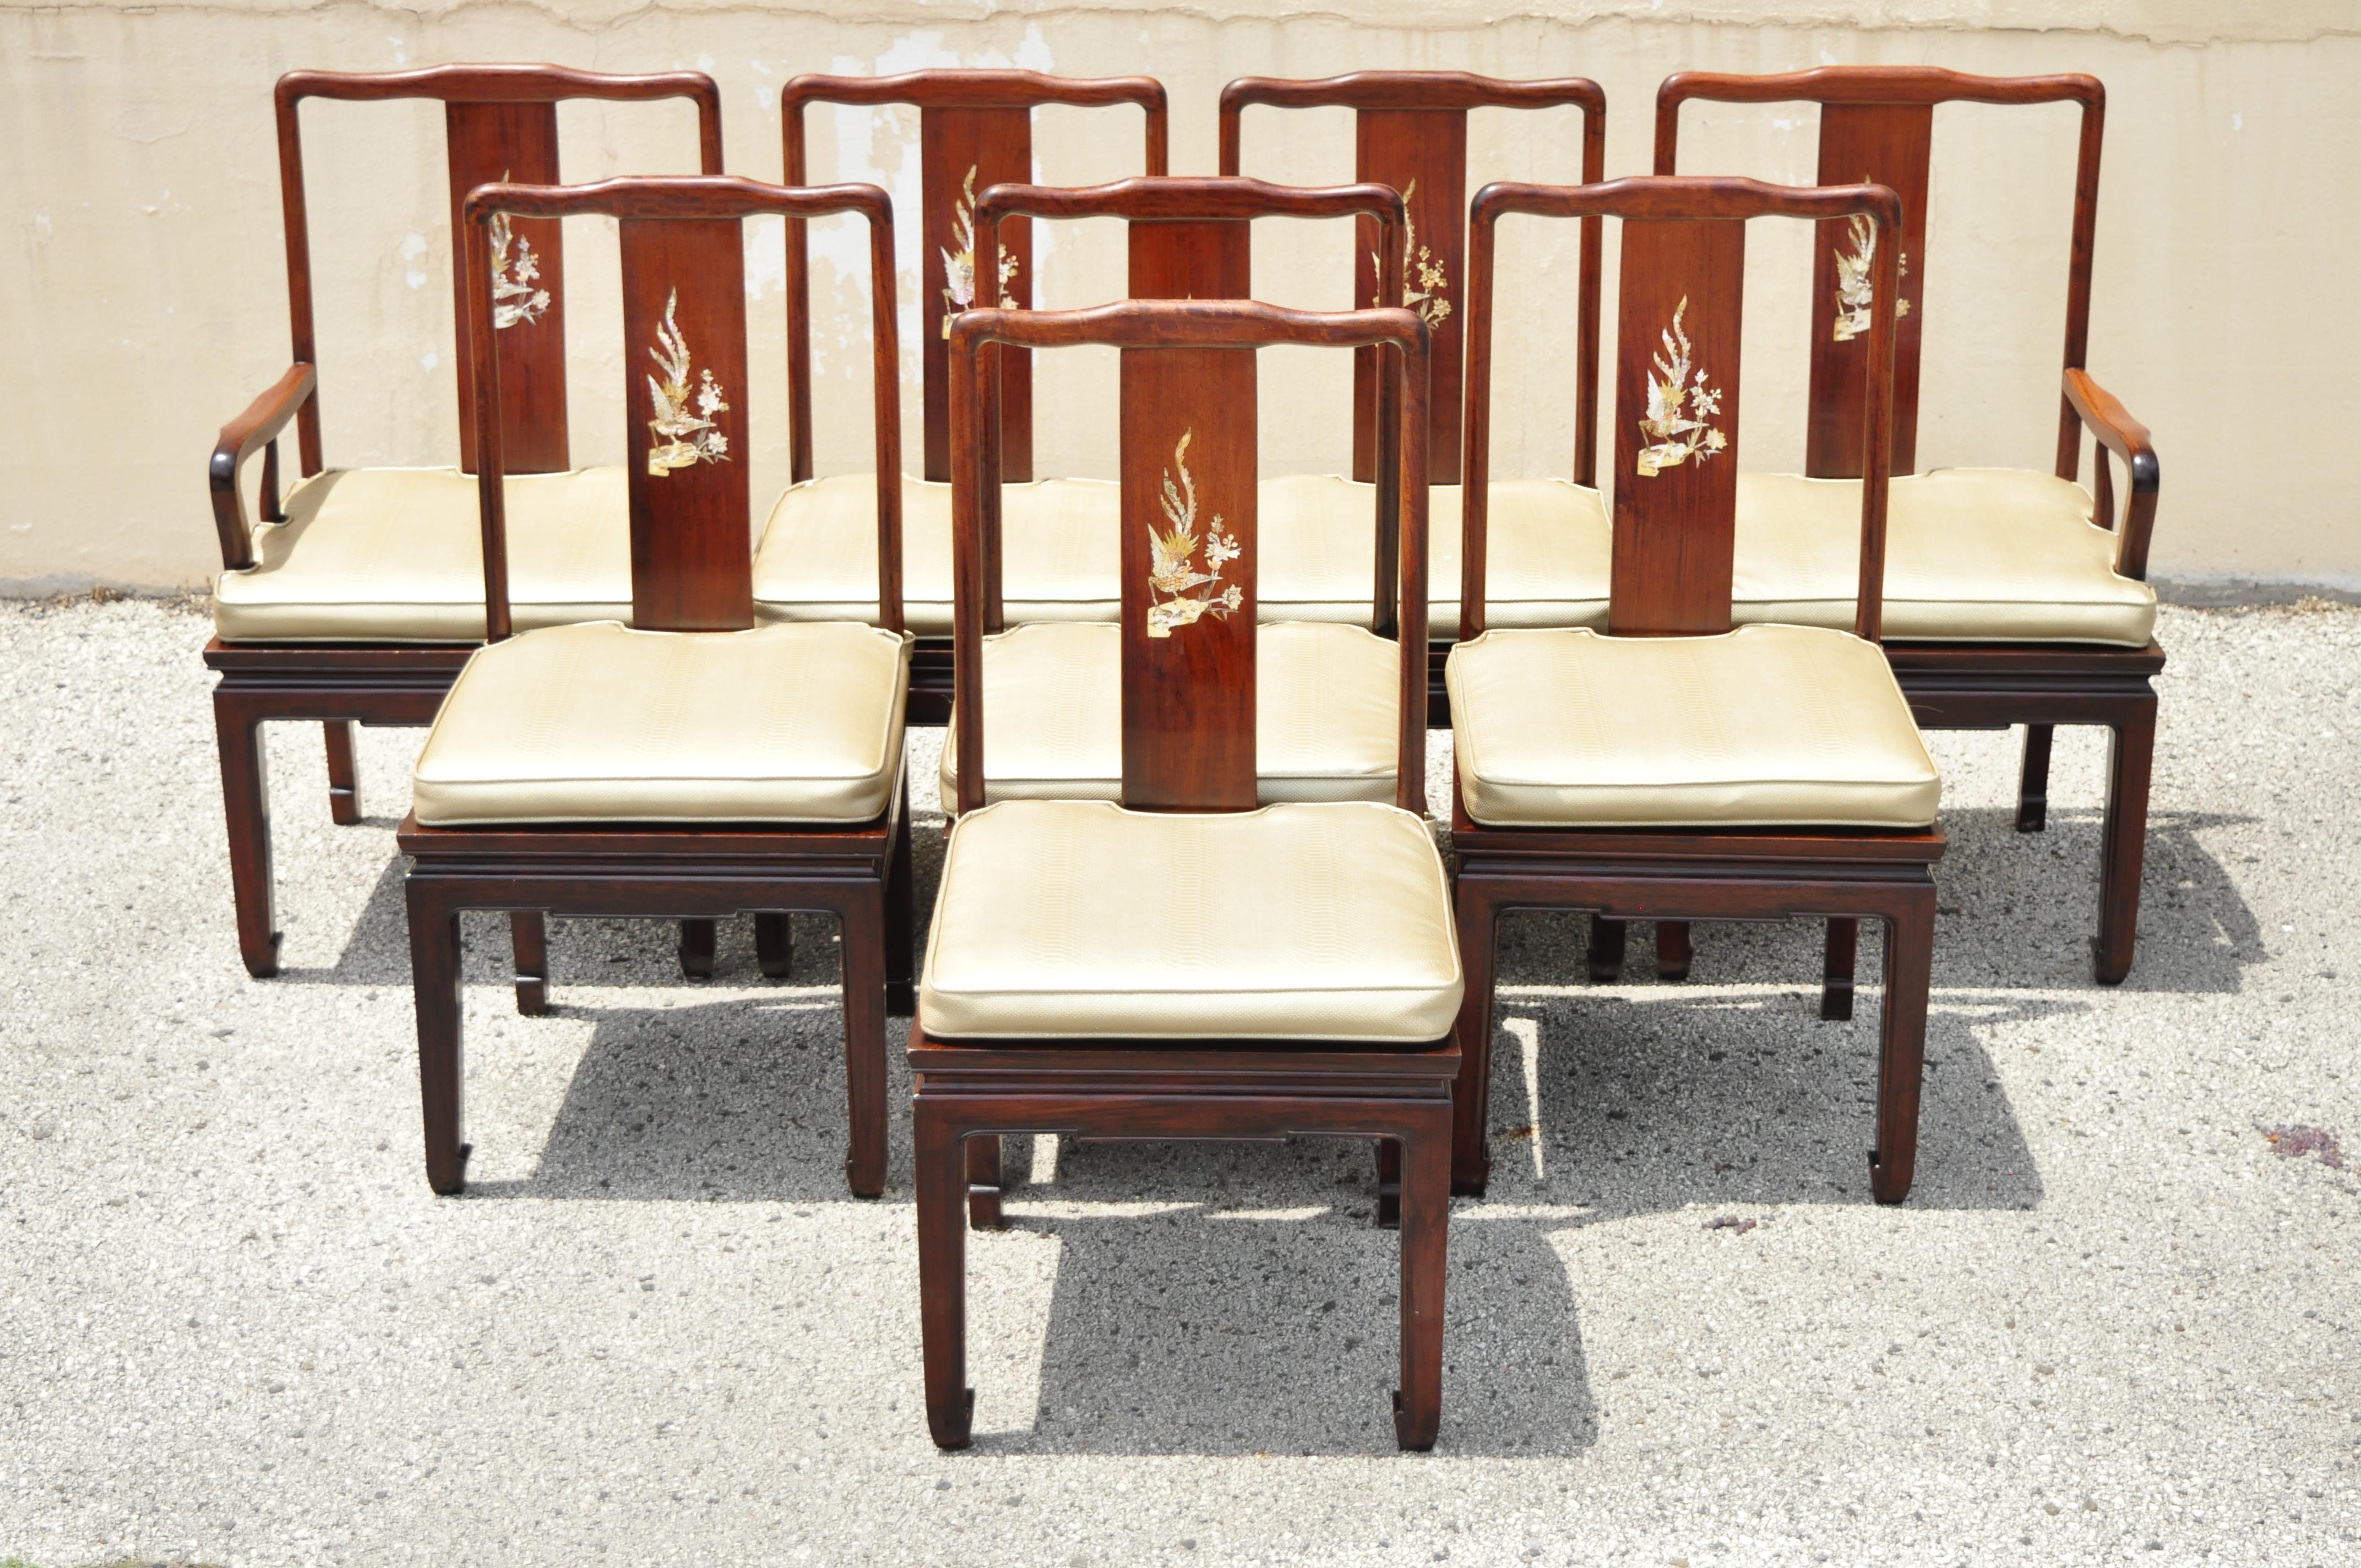 Chinese rosewood cherry Asian dining room set table 8 chairs with mother of pearl inlay - 9pc set. Set includes (1) 24